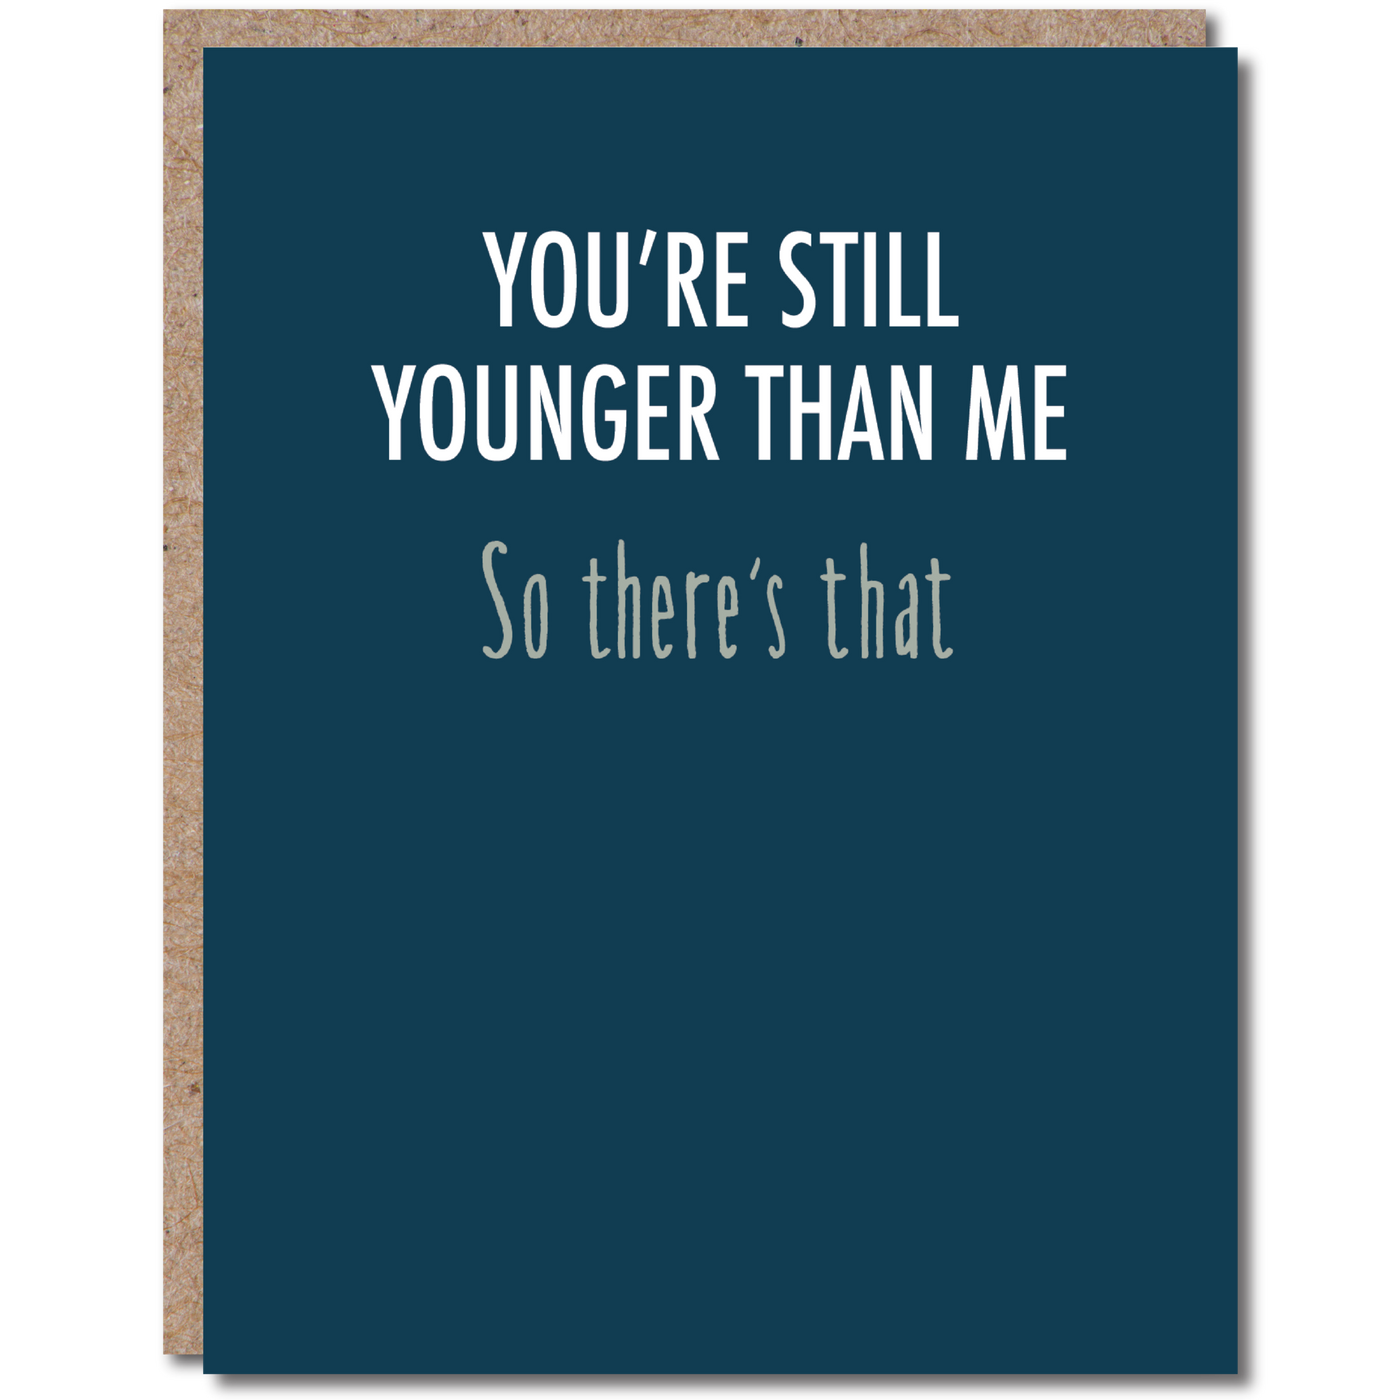 BIRTHDAY GREETING CARD "YOU'RE STILL YOUNGER THAN ME..."